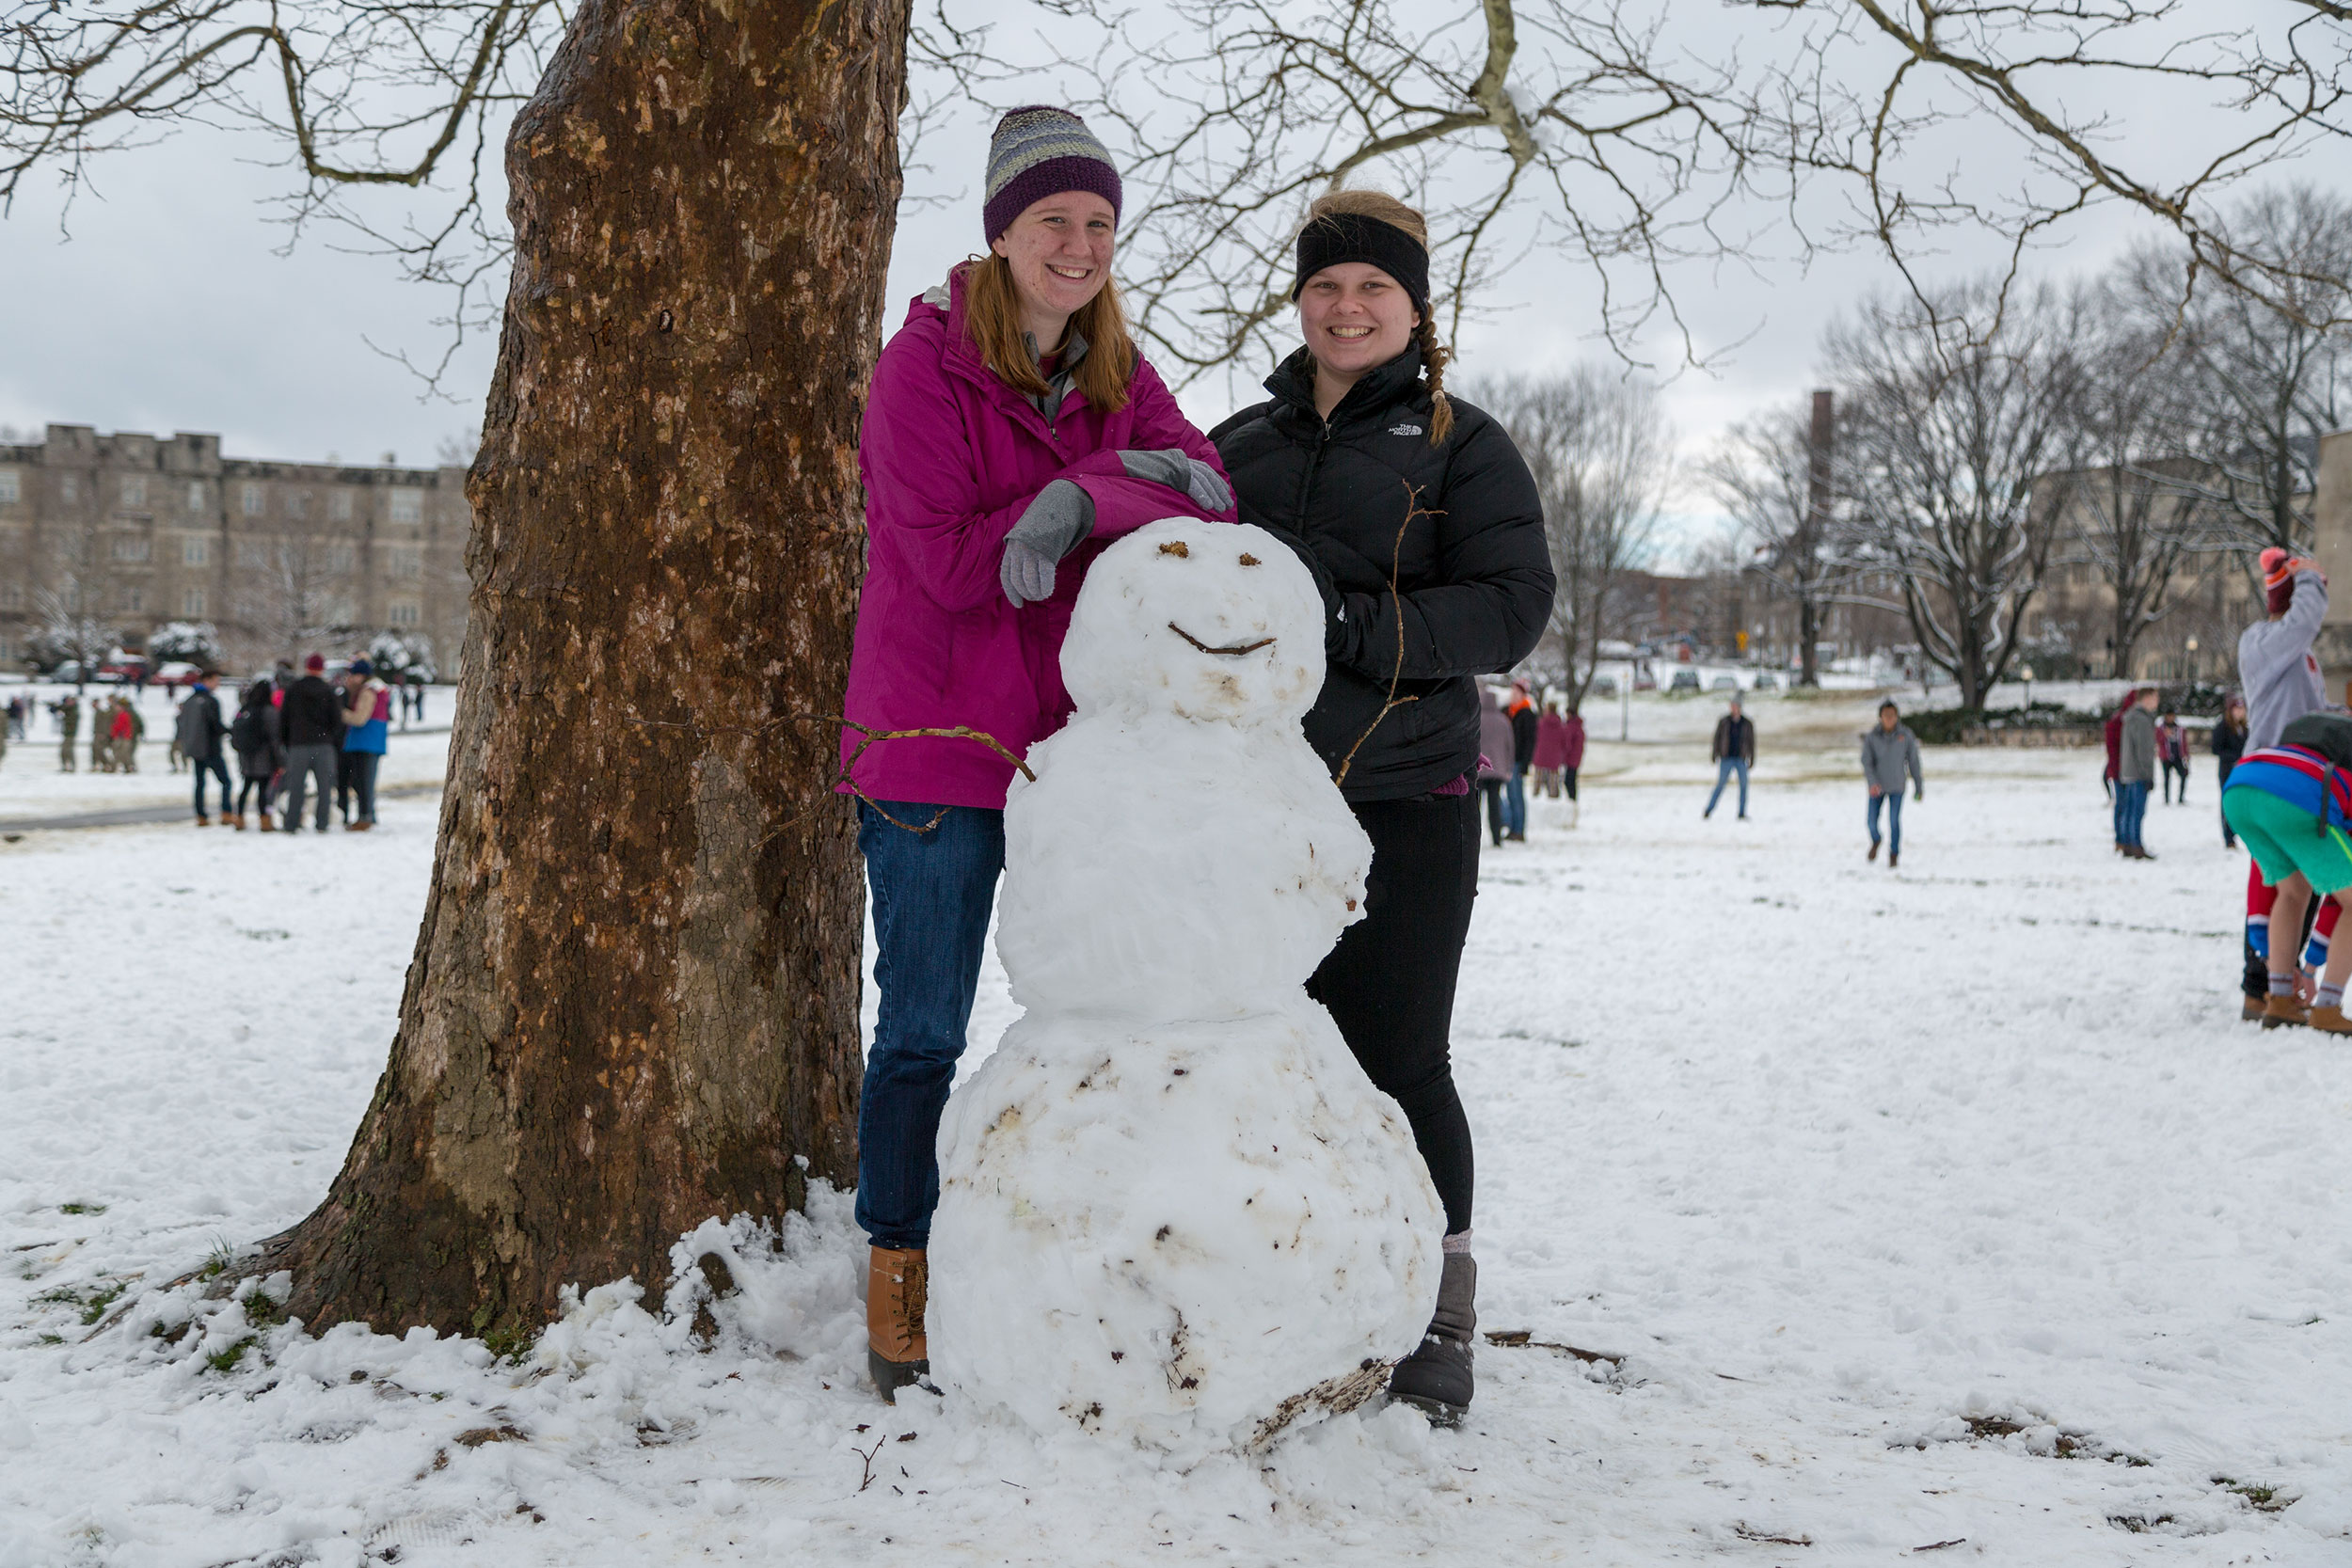 Sophomore MSE major Allison Slomniski (left) and sophomore Jessica Harris pose with their snowman they built on the Drillfield.